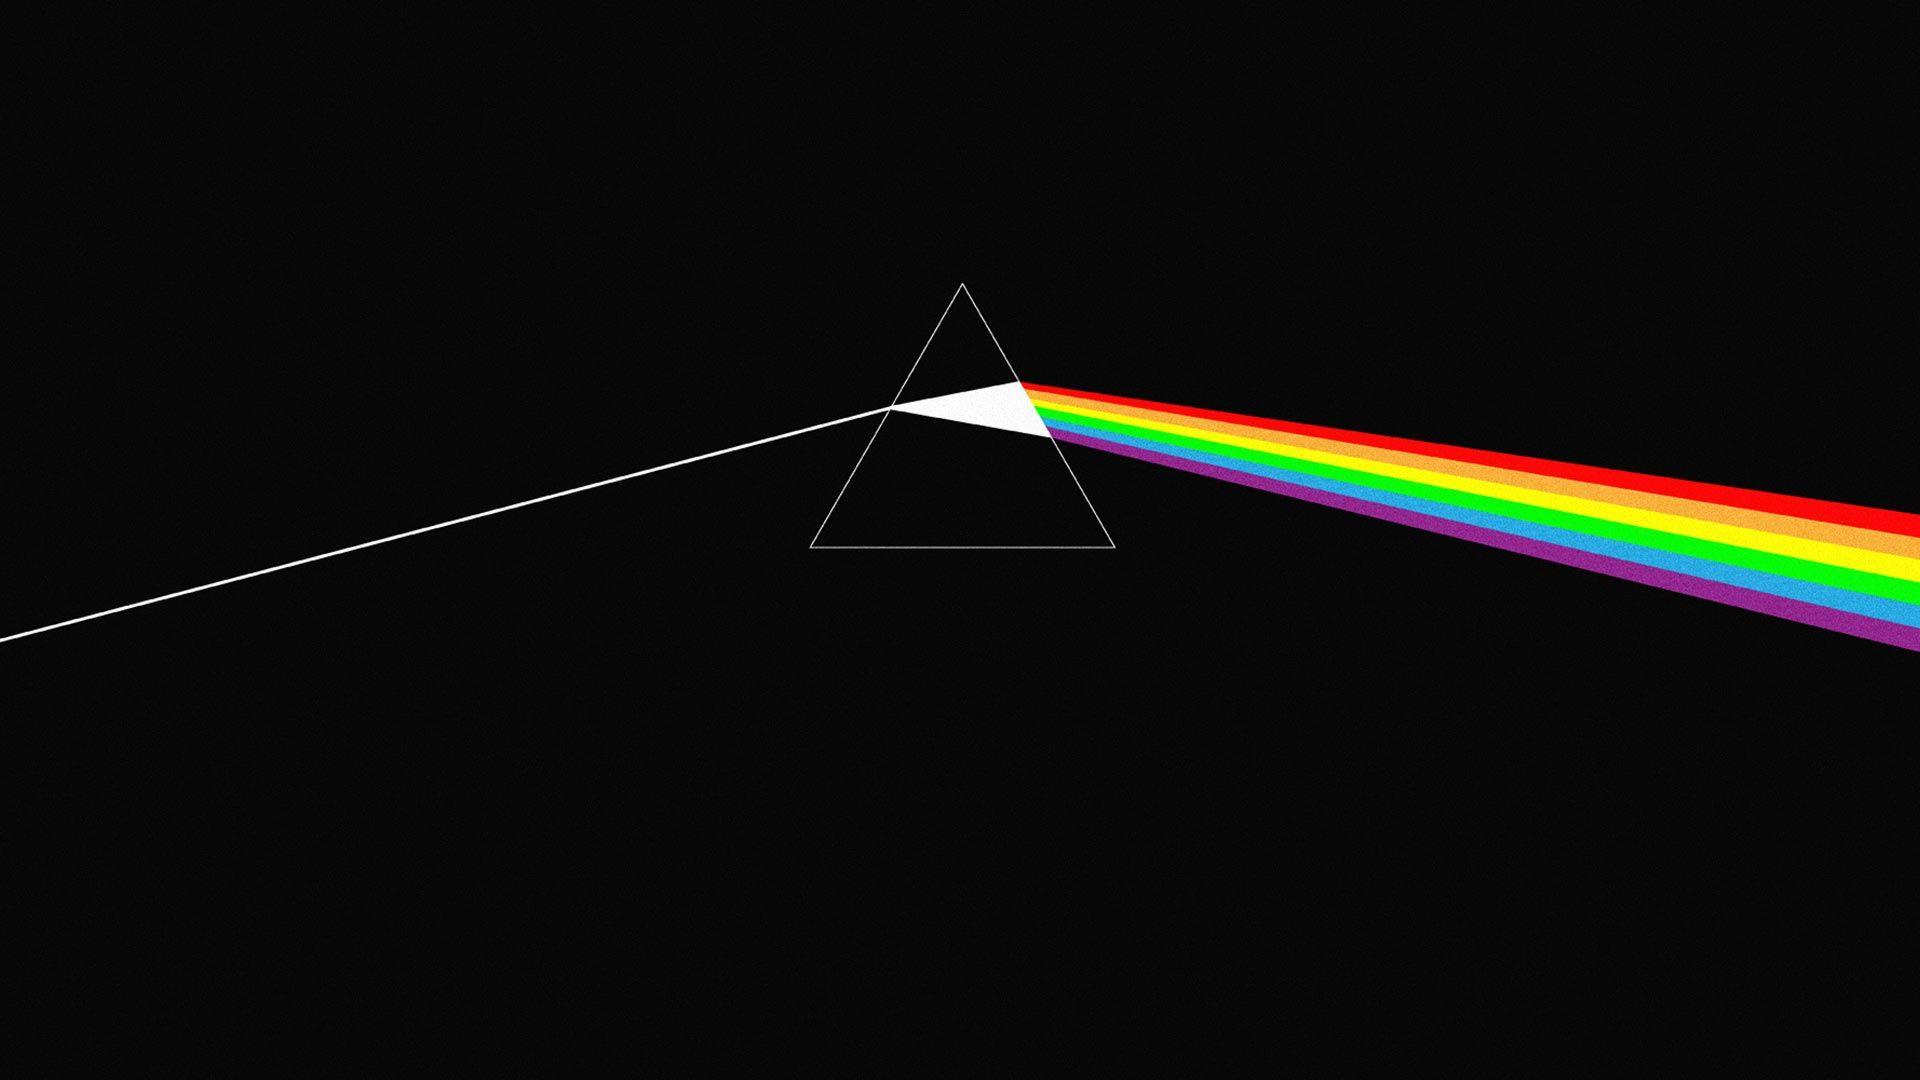 Best 36+ Dark Side of the Moon Wallpapers on HipWallpapers